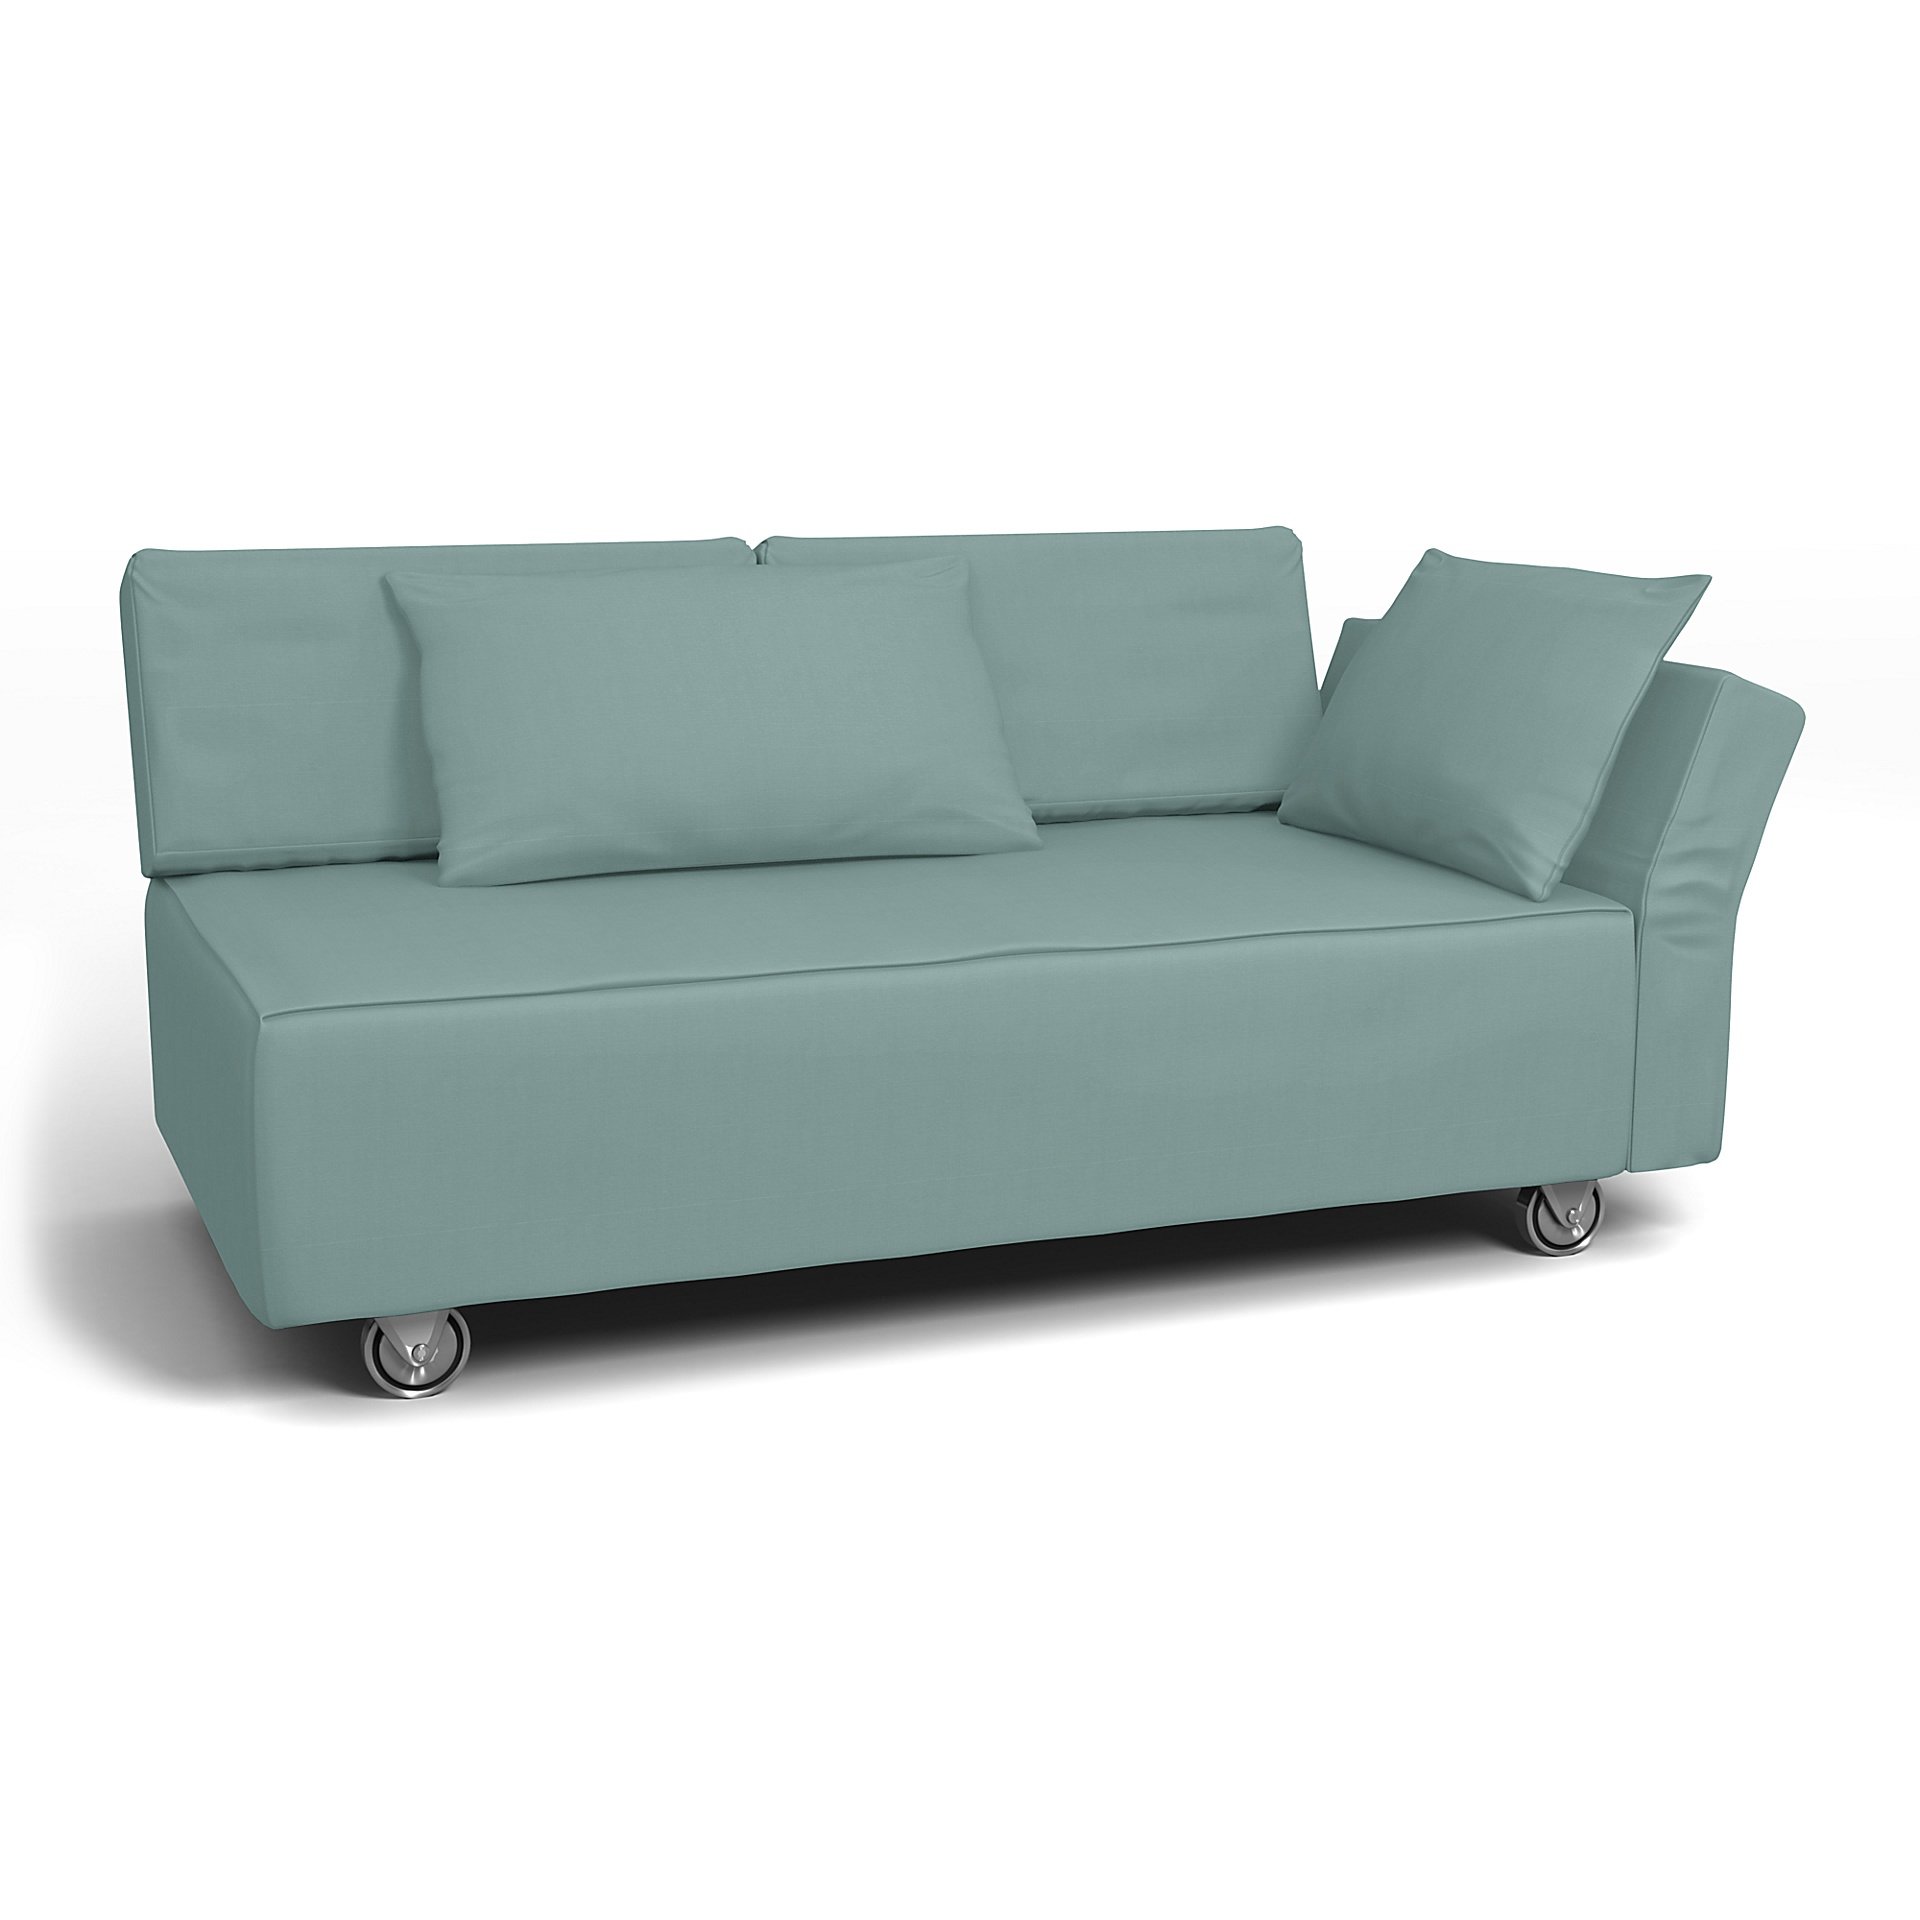 IKEA - Falsterbo 2 Seat Sofa with Right Arm Cover, Mineral Blue, Cotton - Bemz